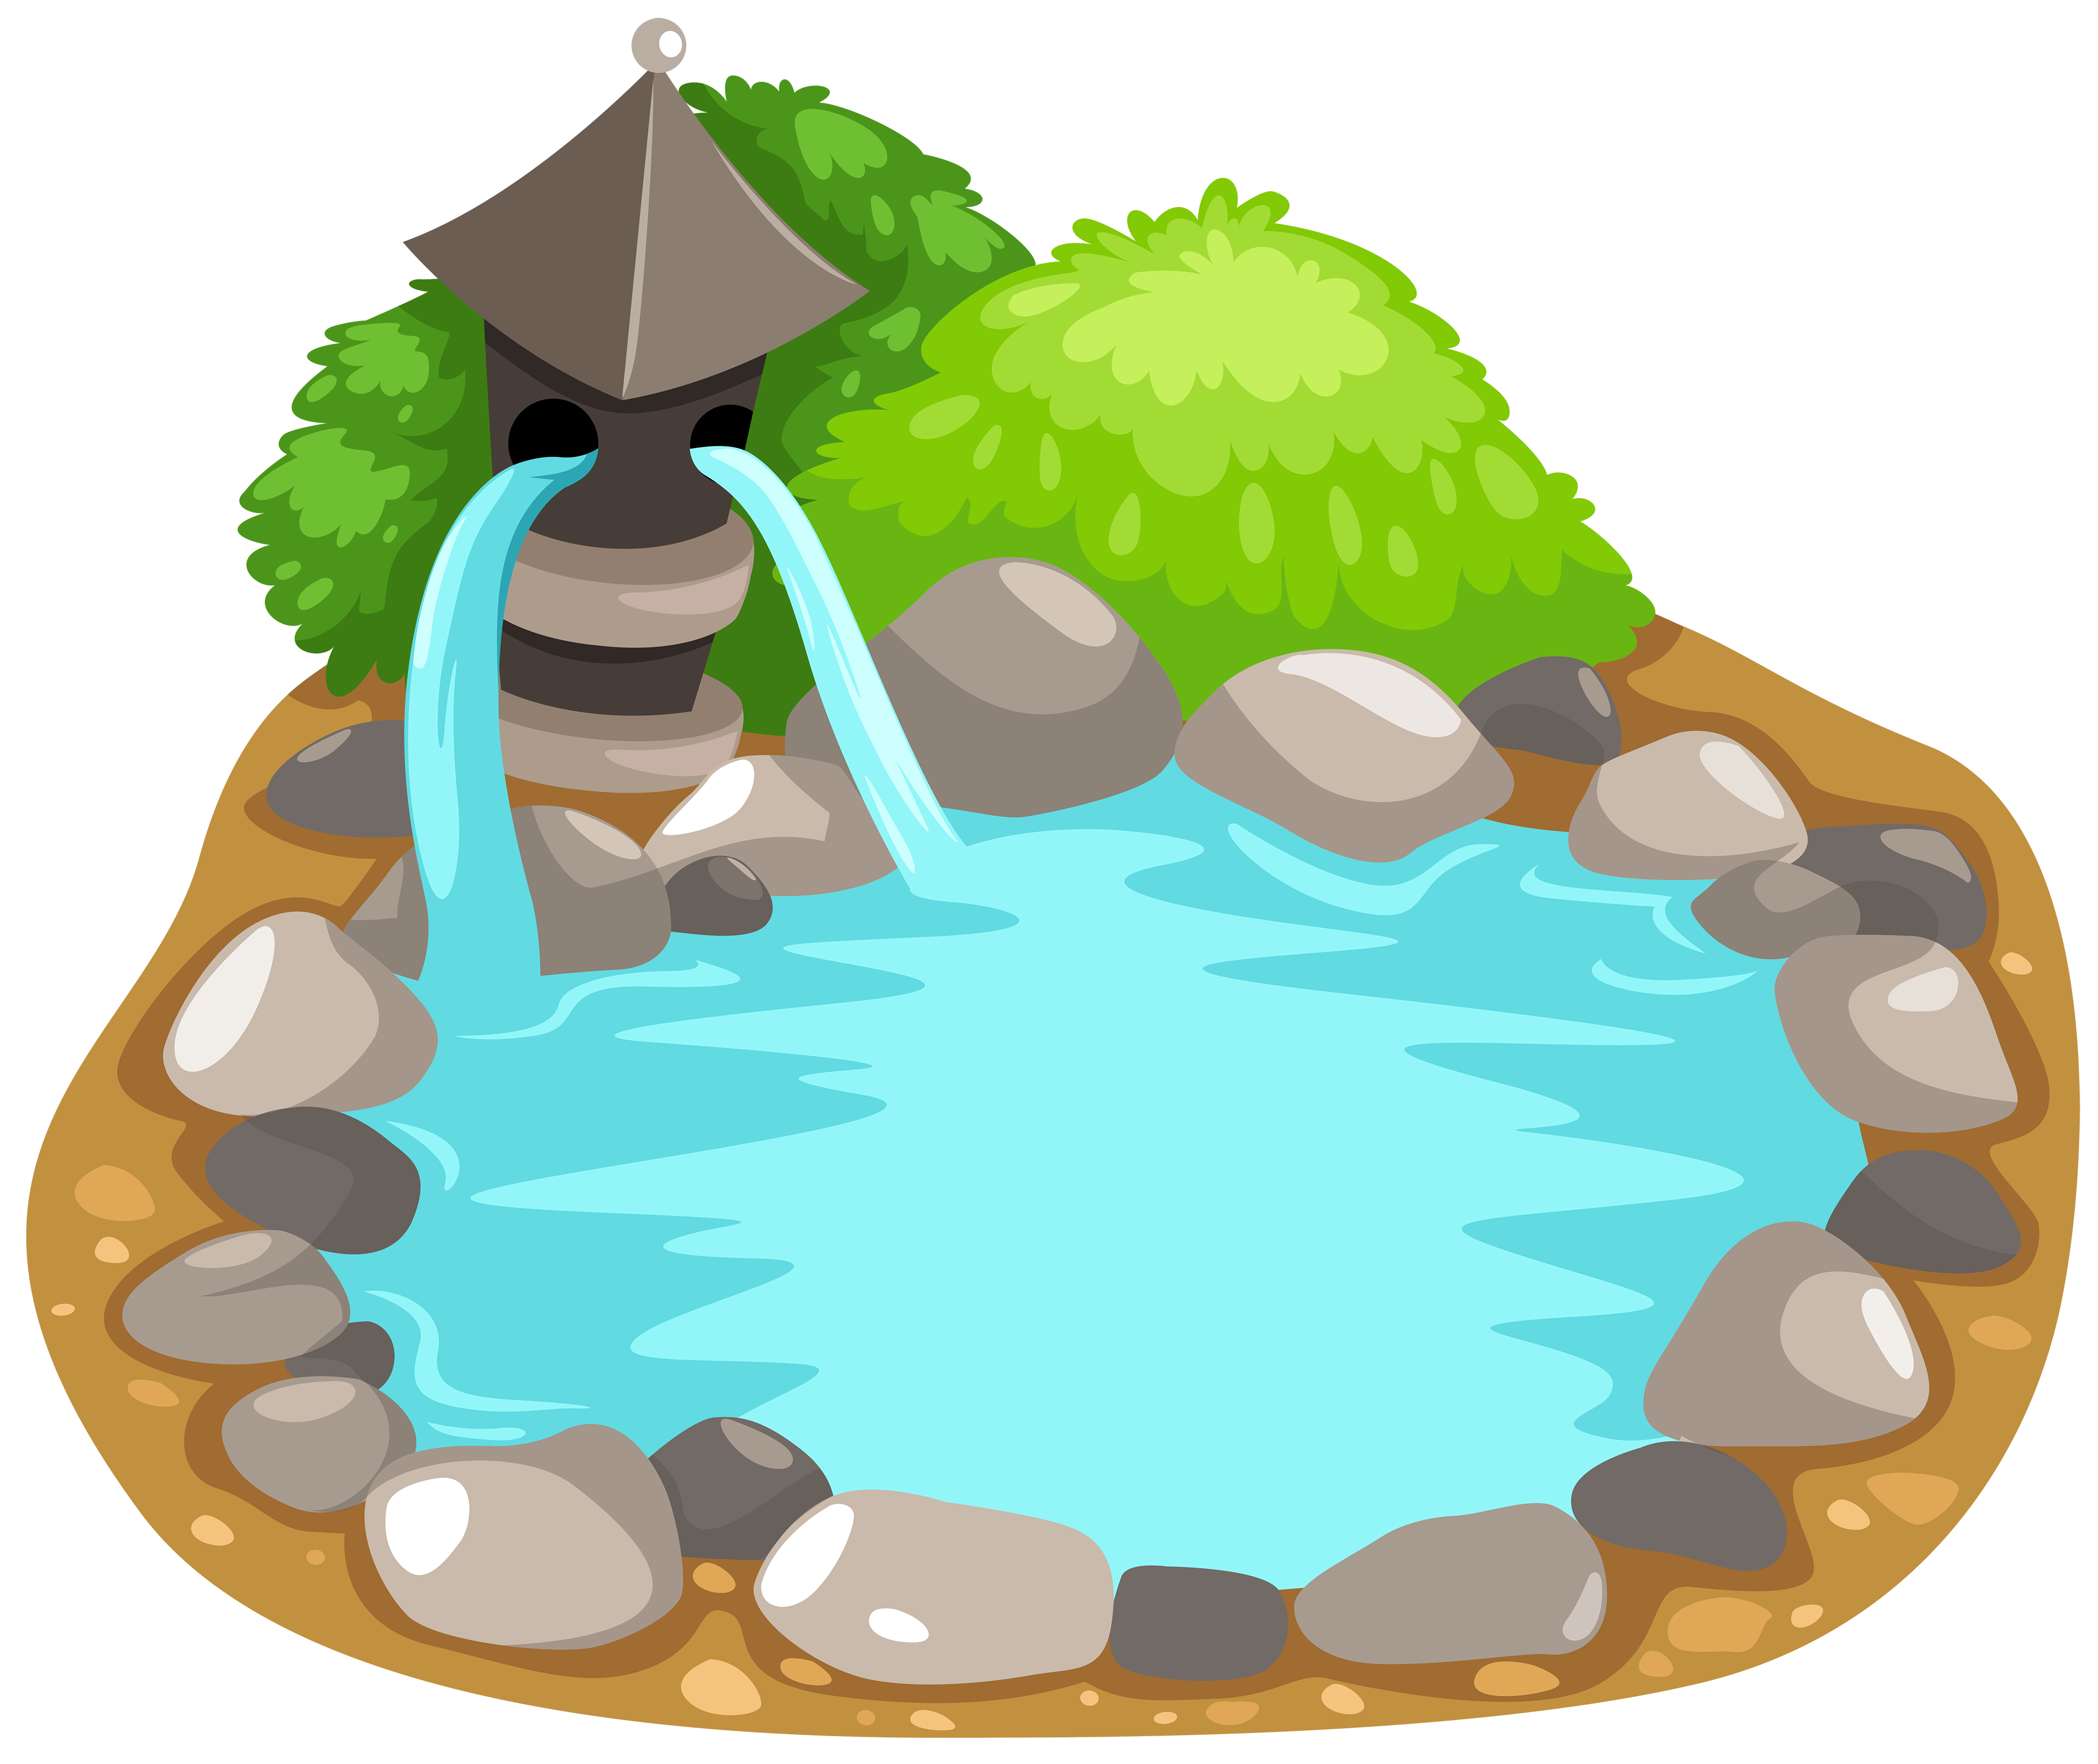 Hole clipart garden soil. Pond png pinterest and